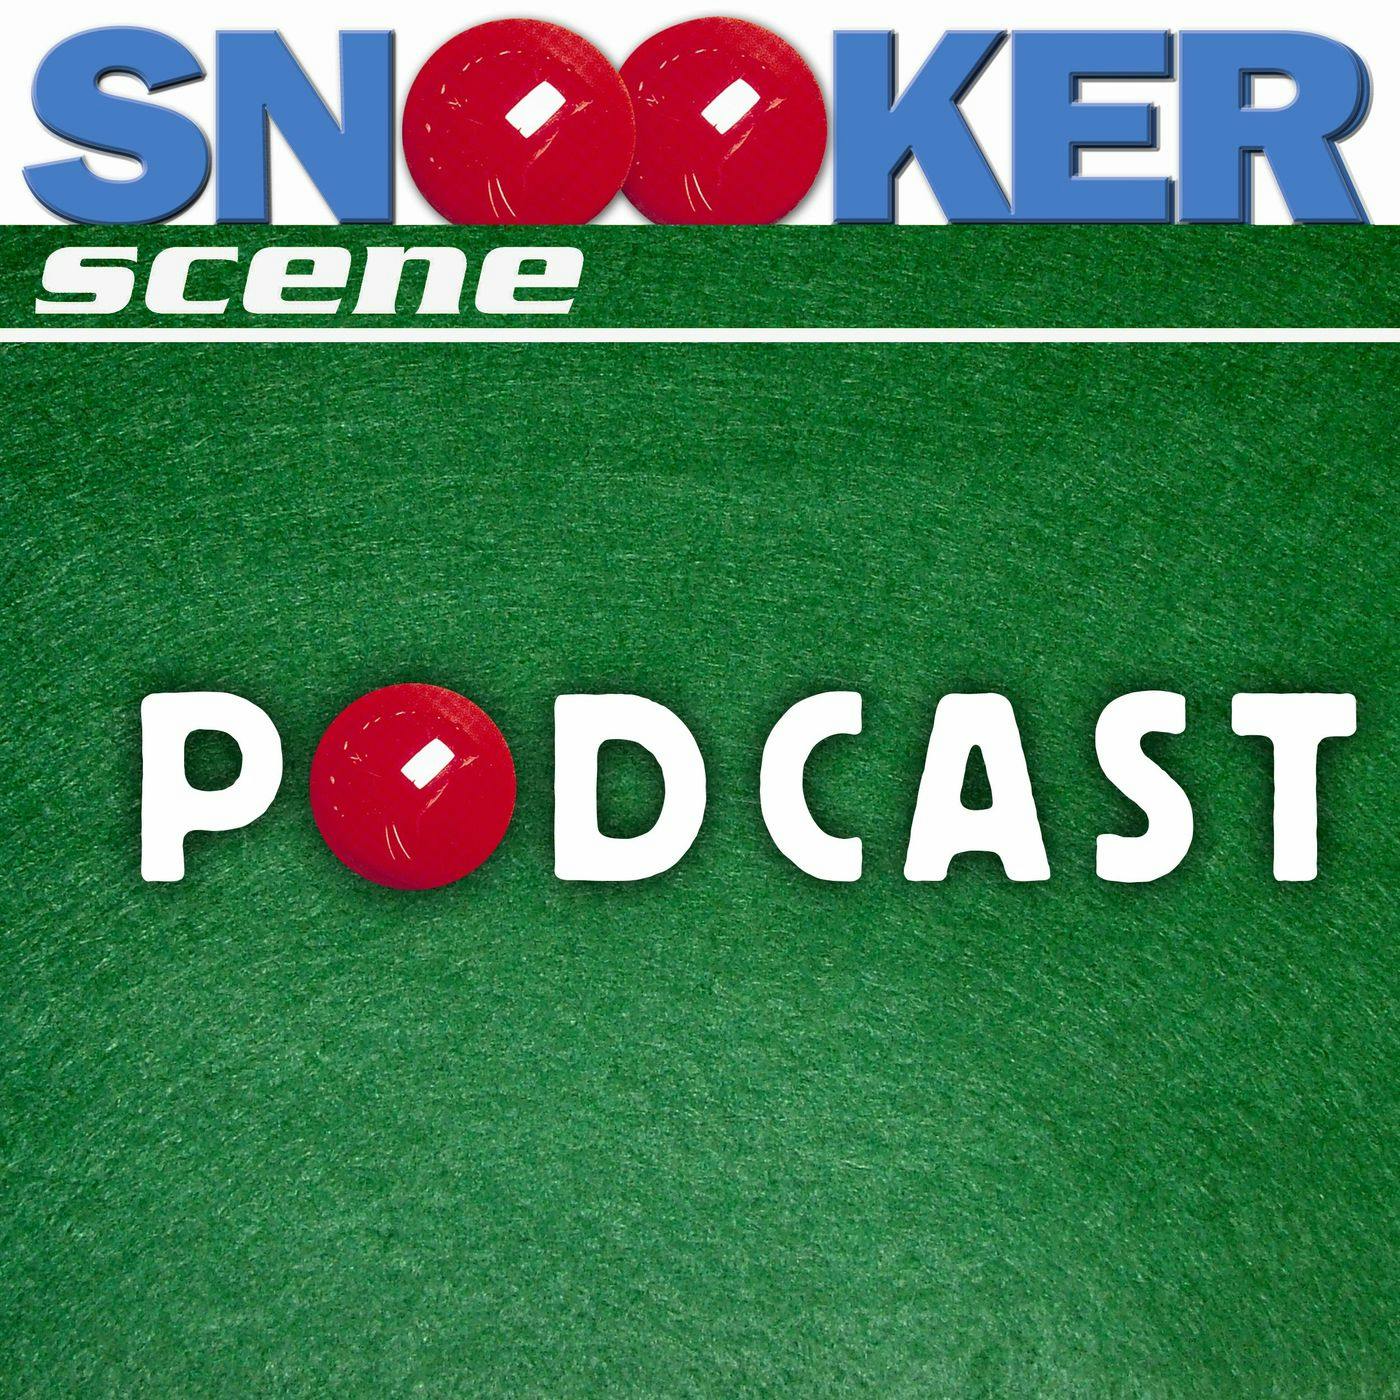 Snooker Scene Podcast episode 179 - Champion of Champions preview